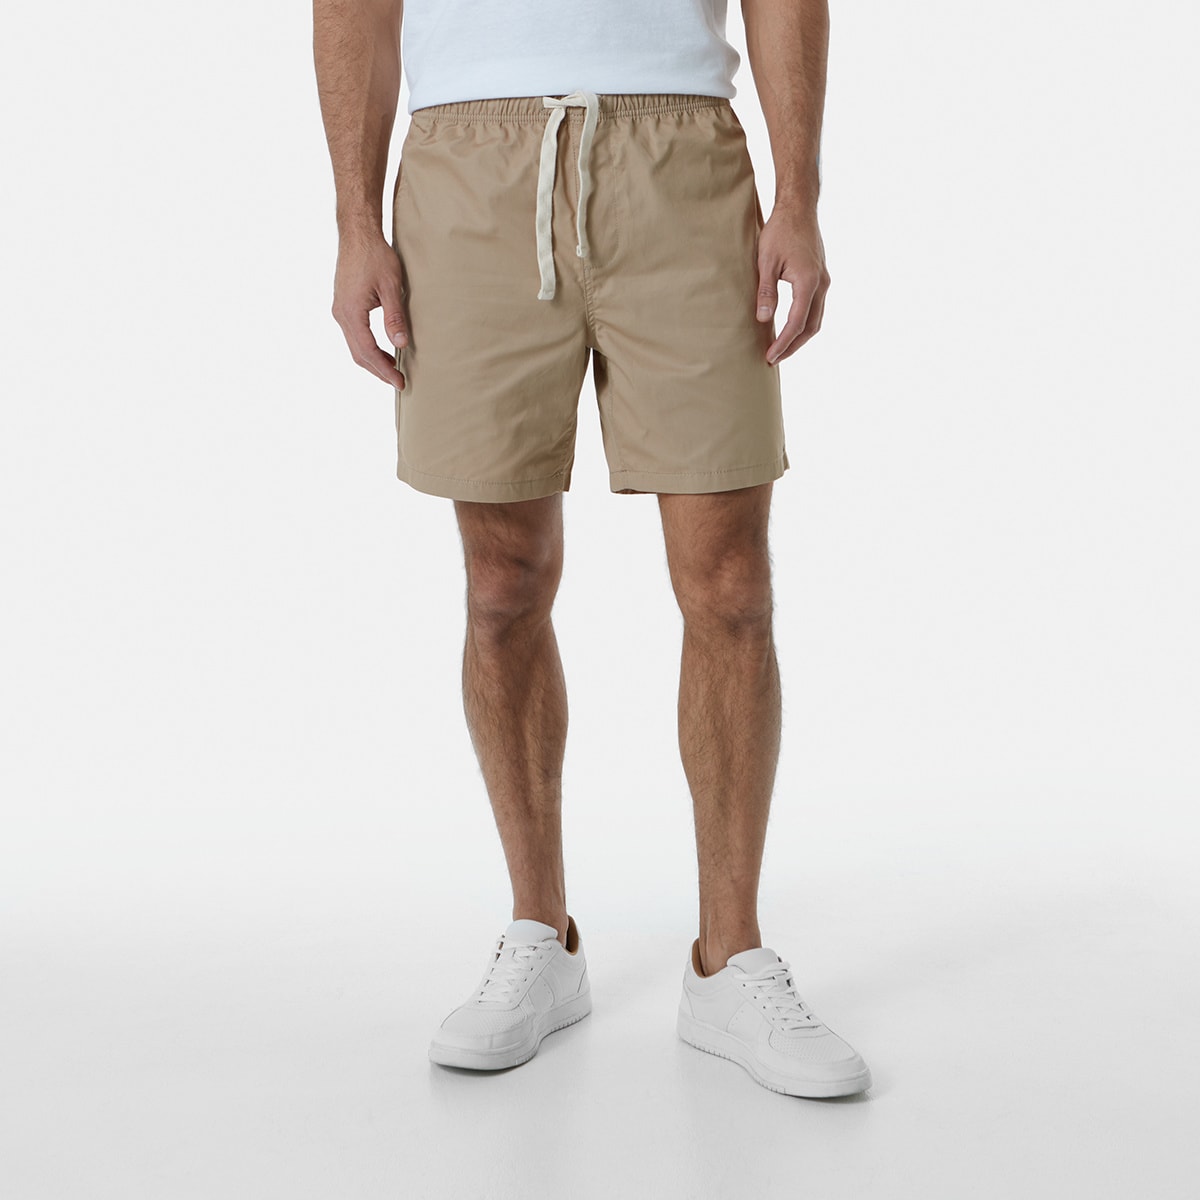 Classic Volley Shorts - Kmart